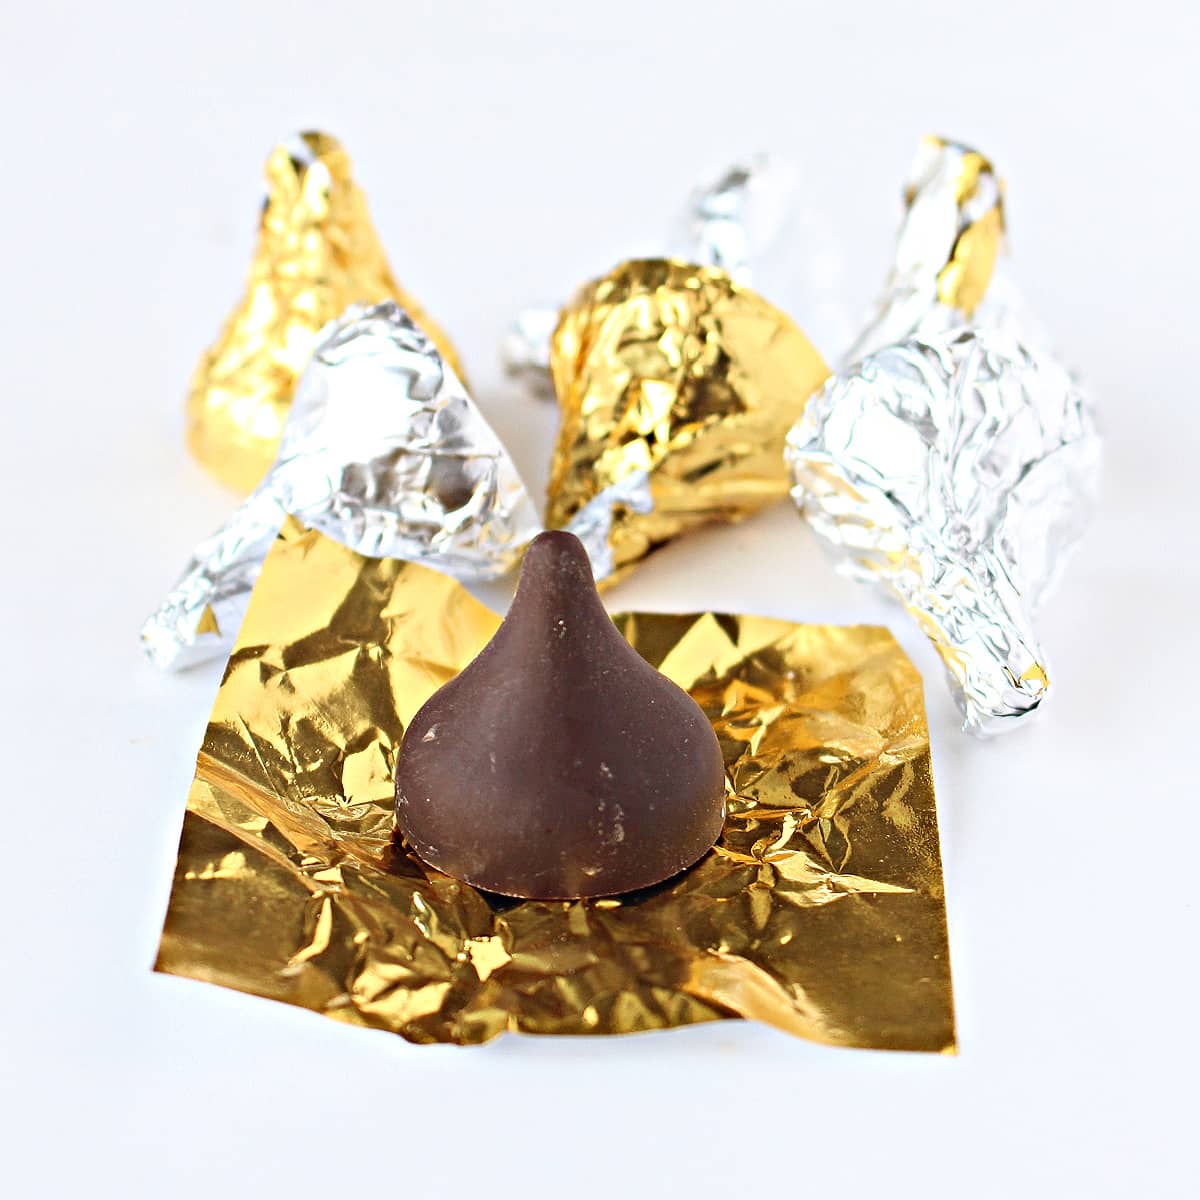 Chocolate kiss on a square of gold foil with foil wrapped kisses in the background.